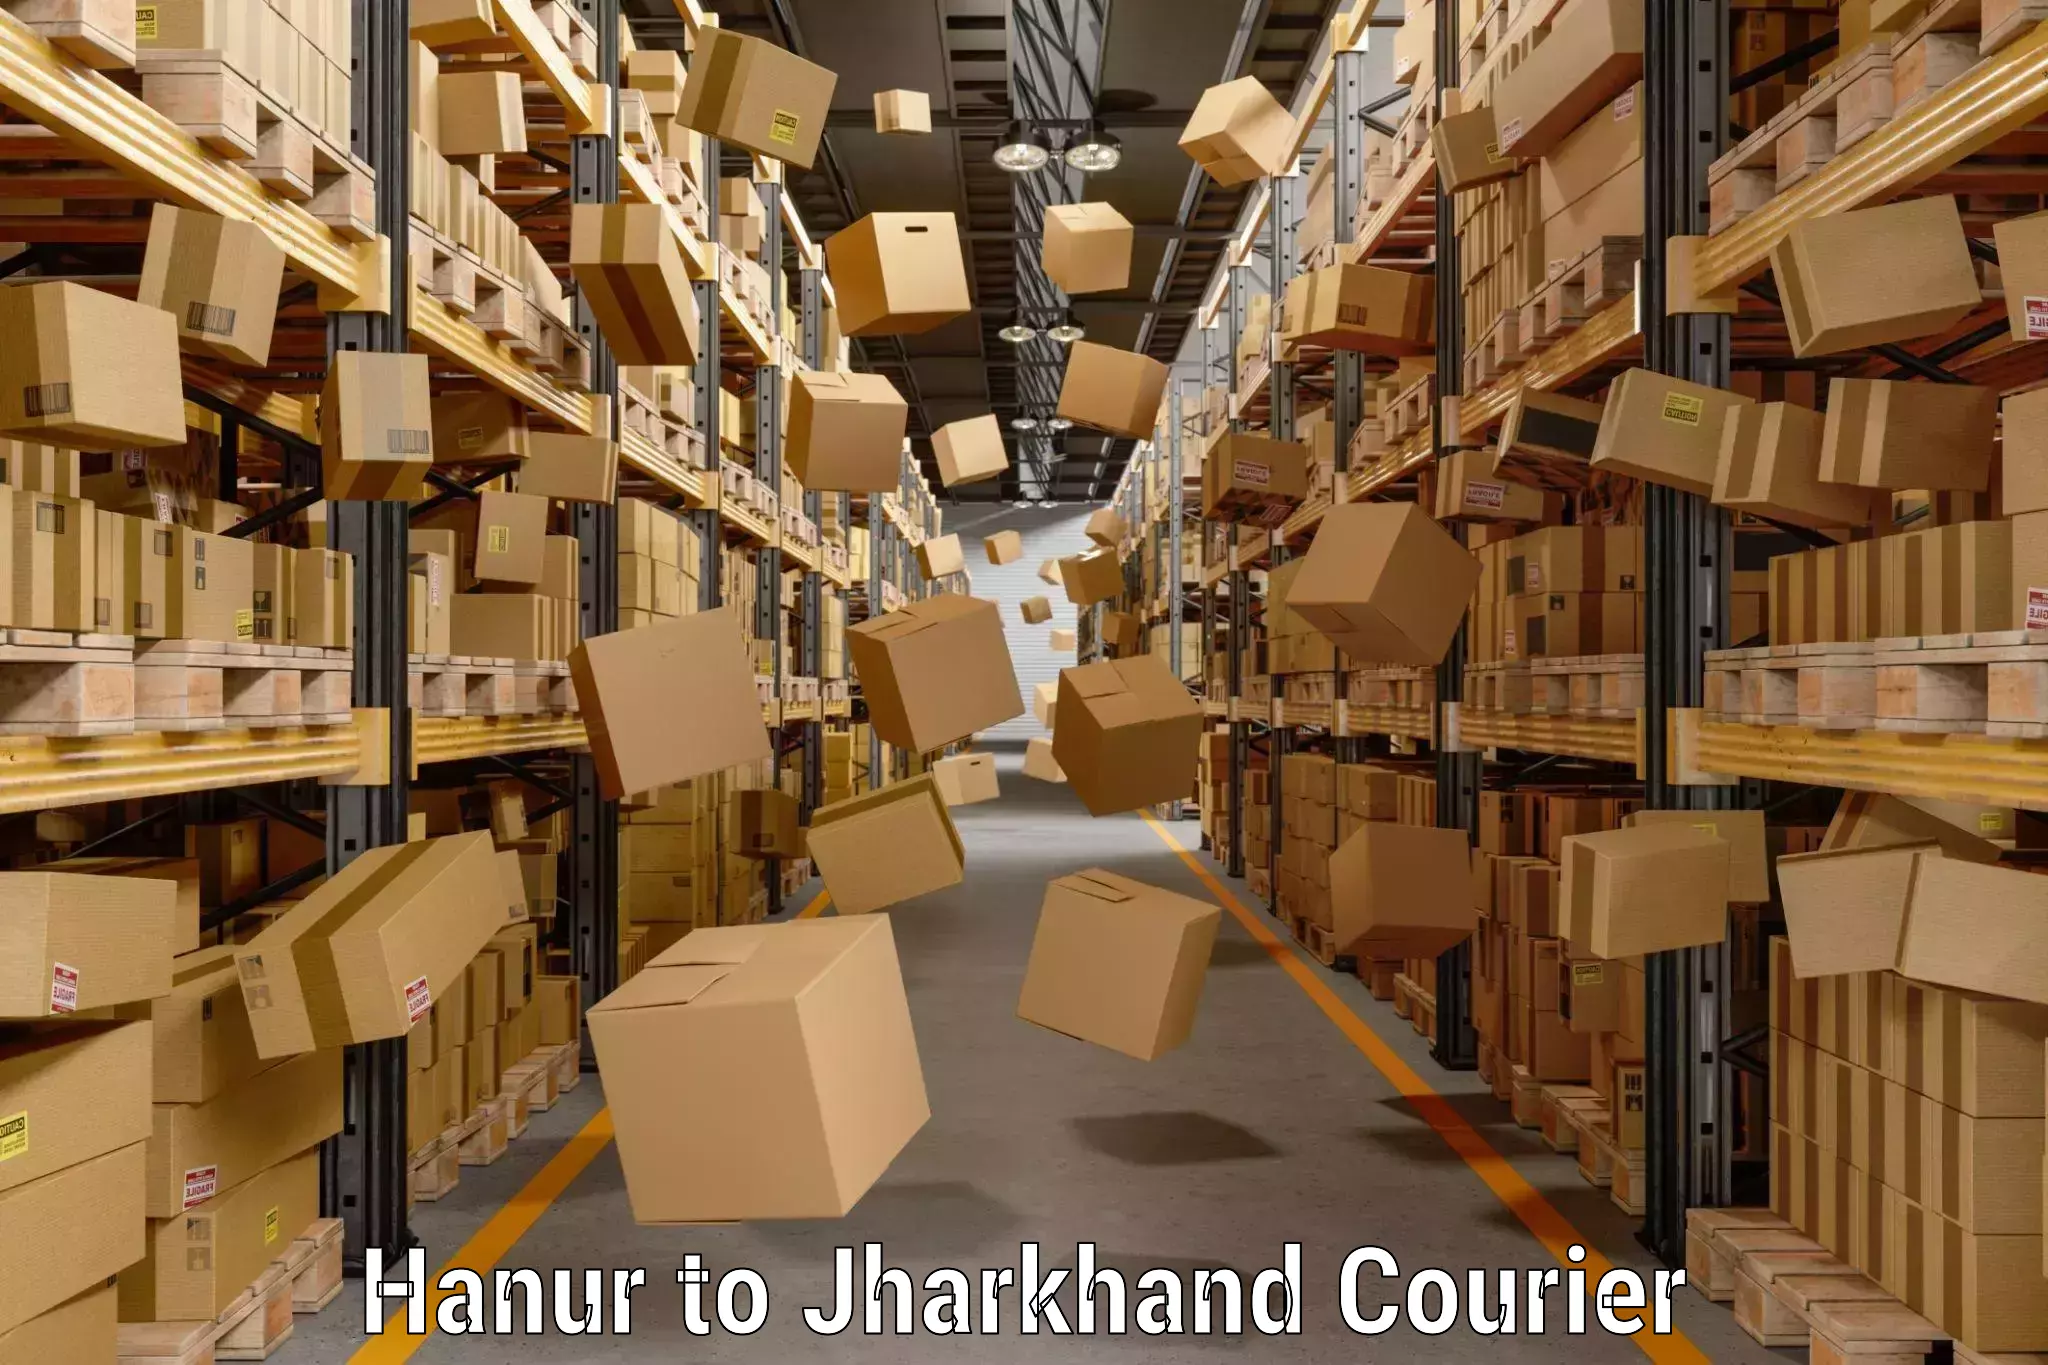 Luggage shipment specialists Hanur to Jharkhand